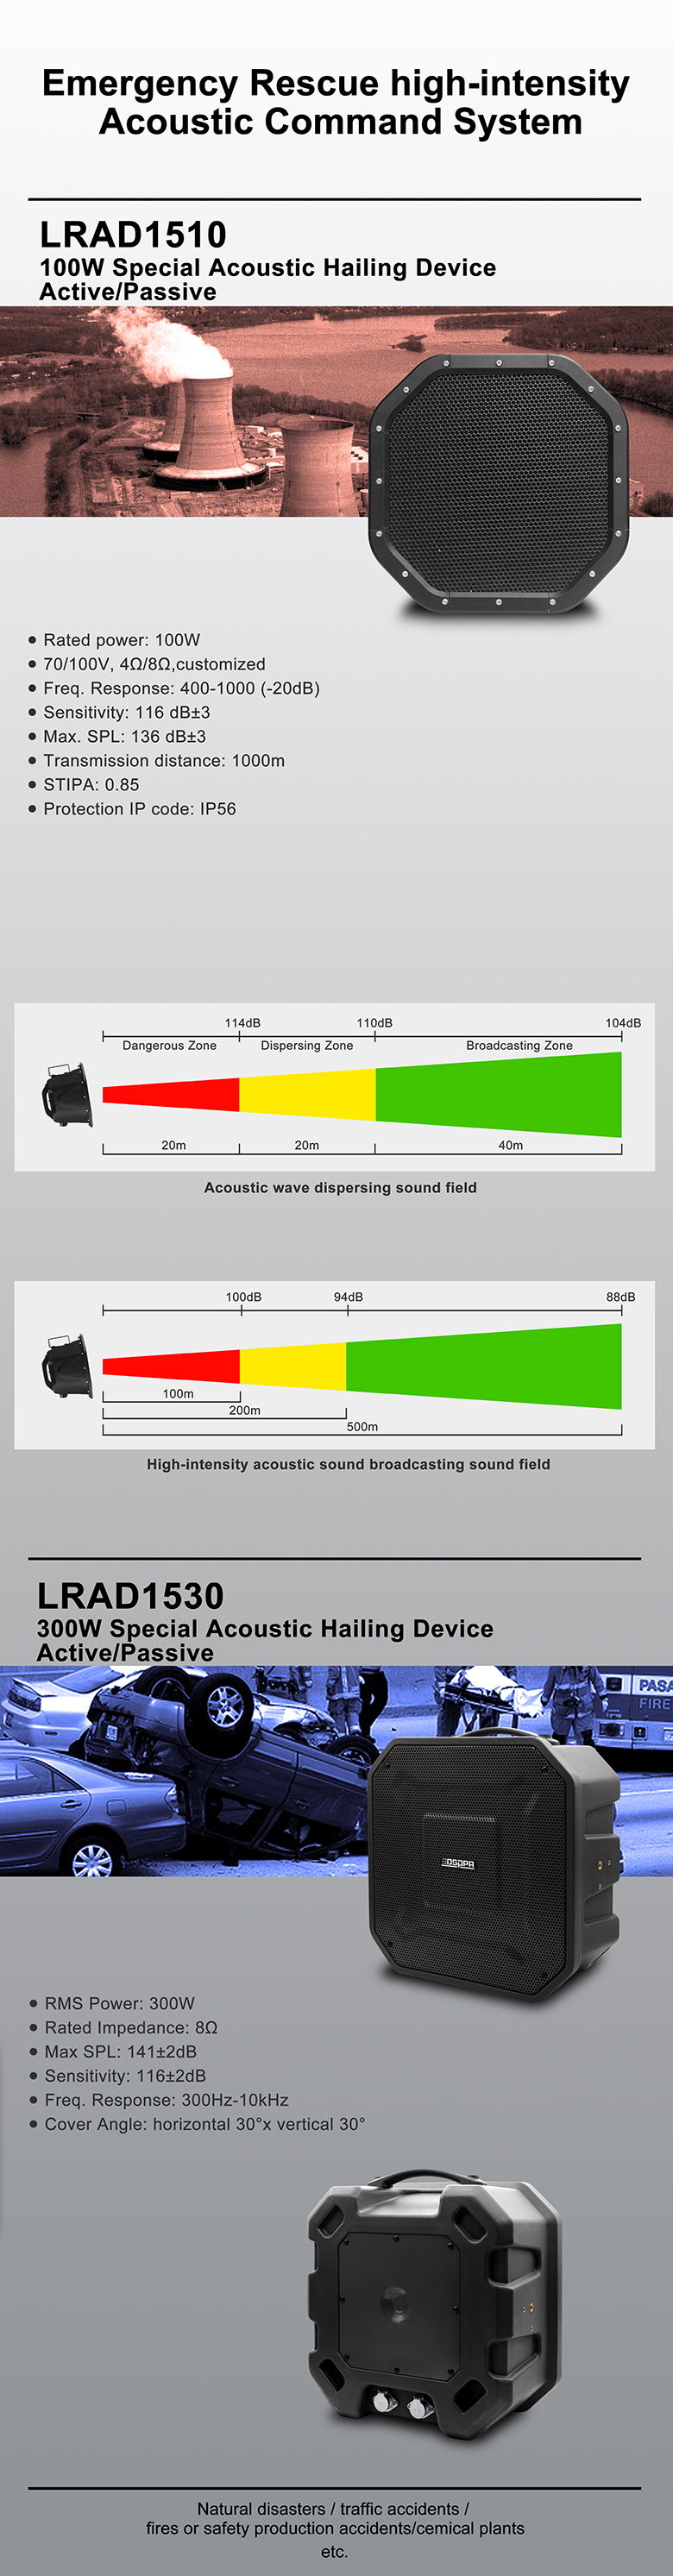 LRAD1510 Special Acoustic Hailing Device Active/Passive 100W